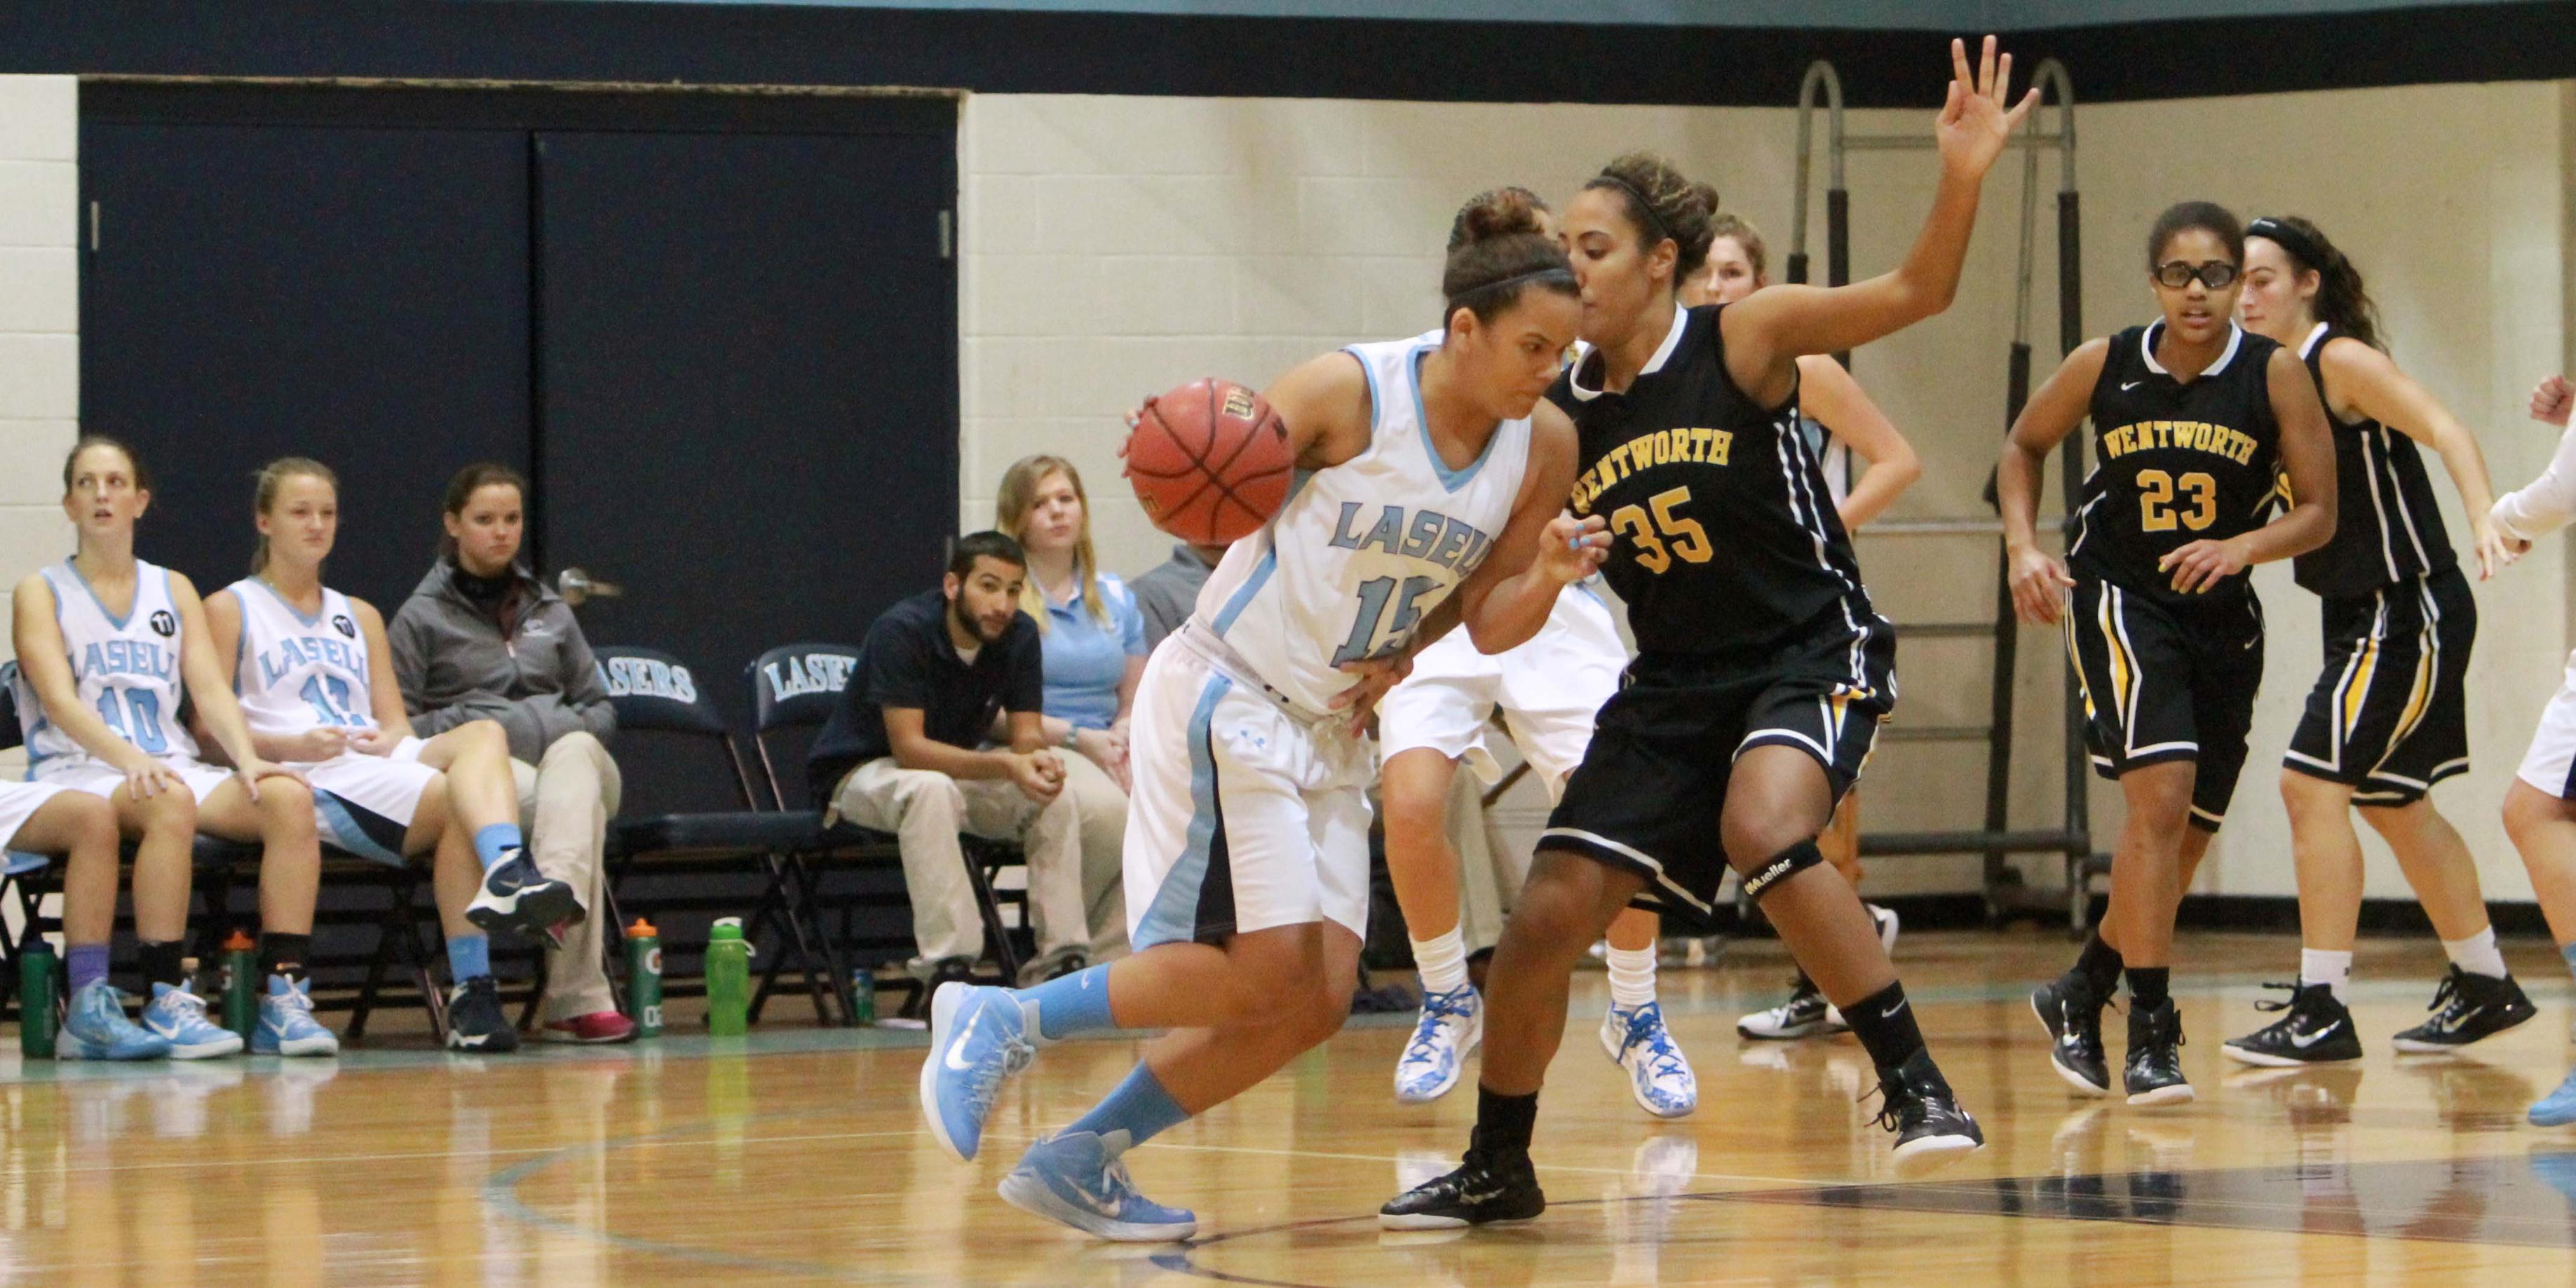 Women's Basketball Falls to Colby 77-49 in Home Opener